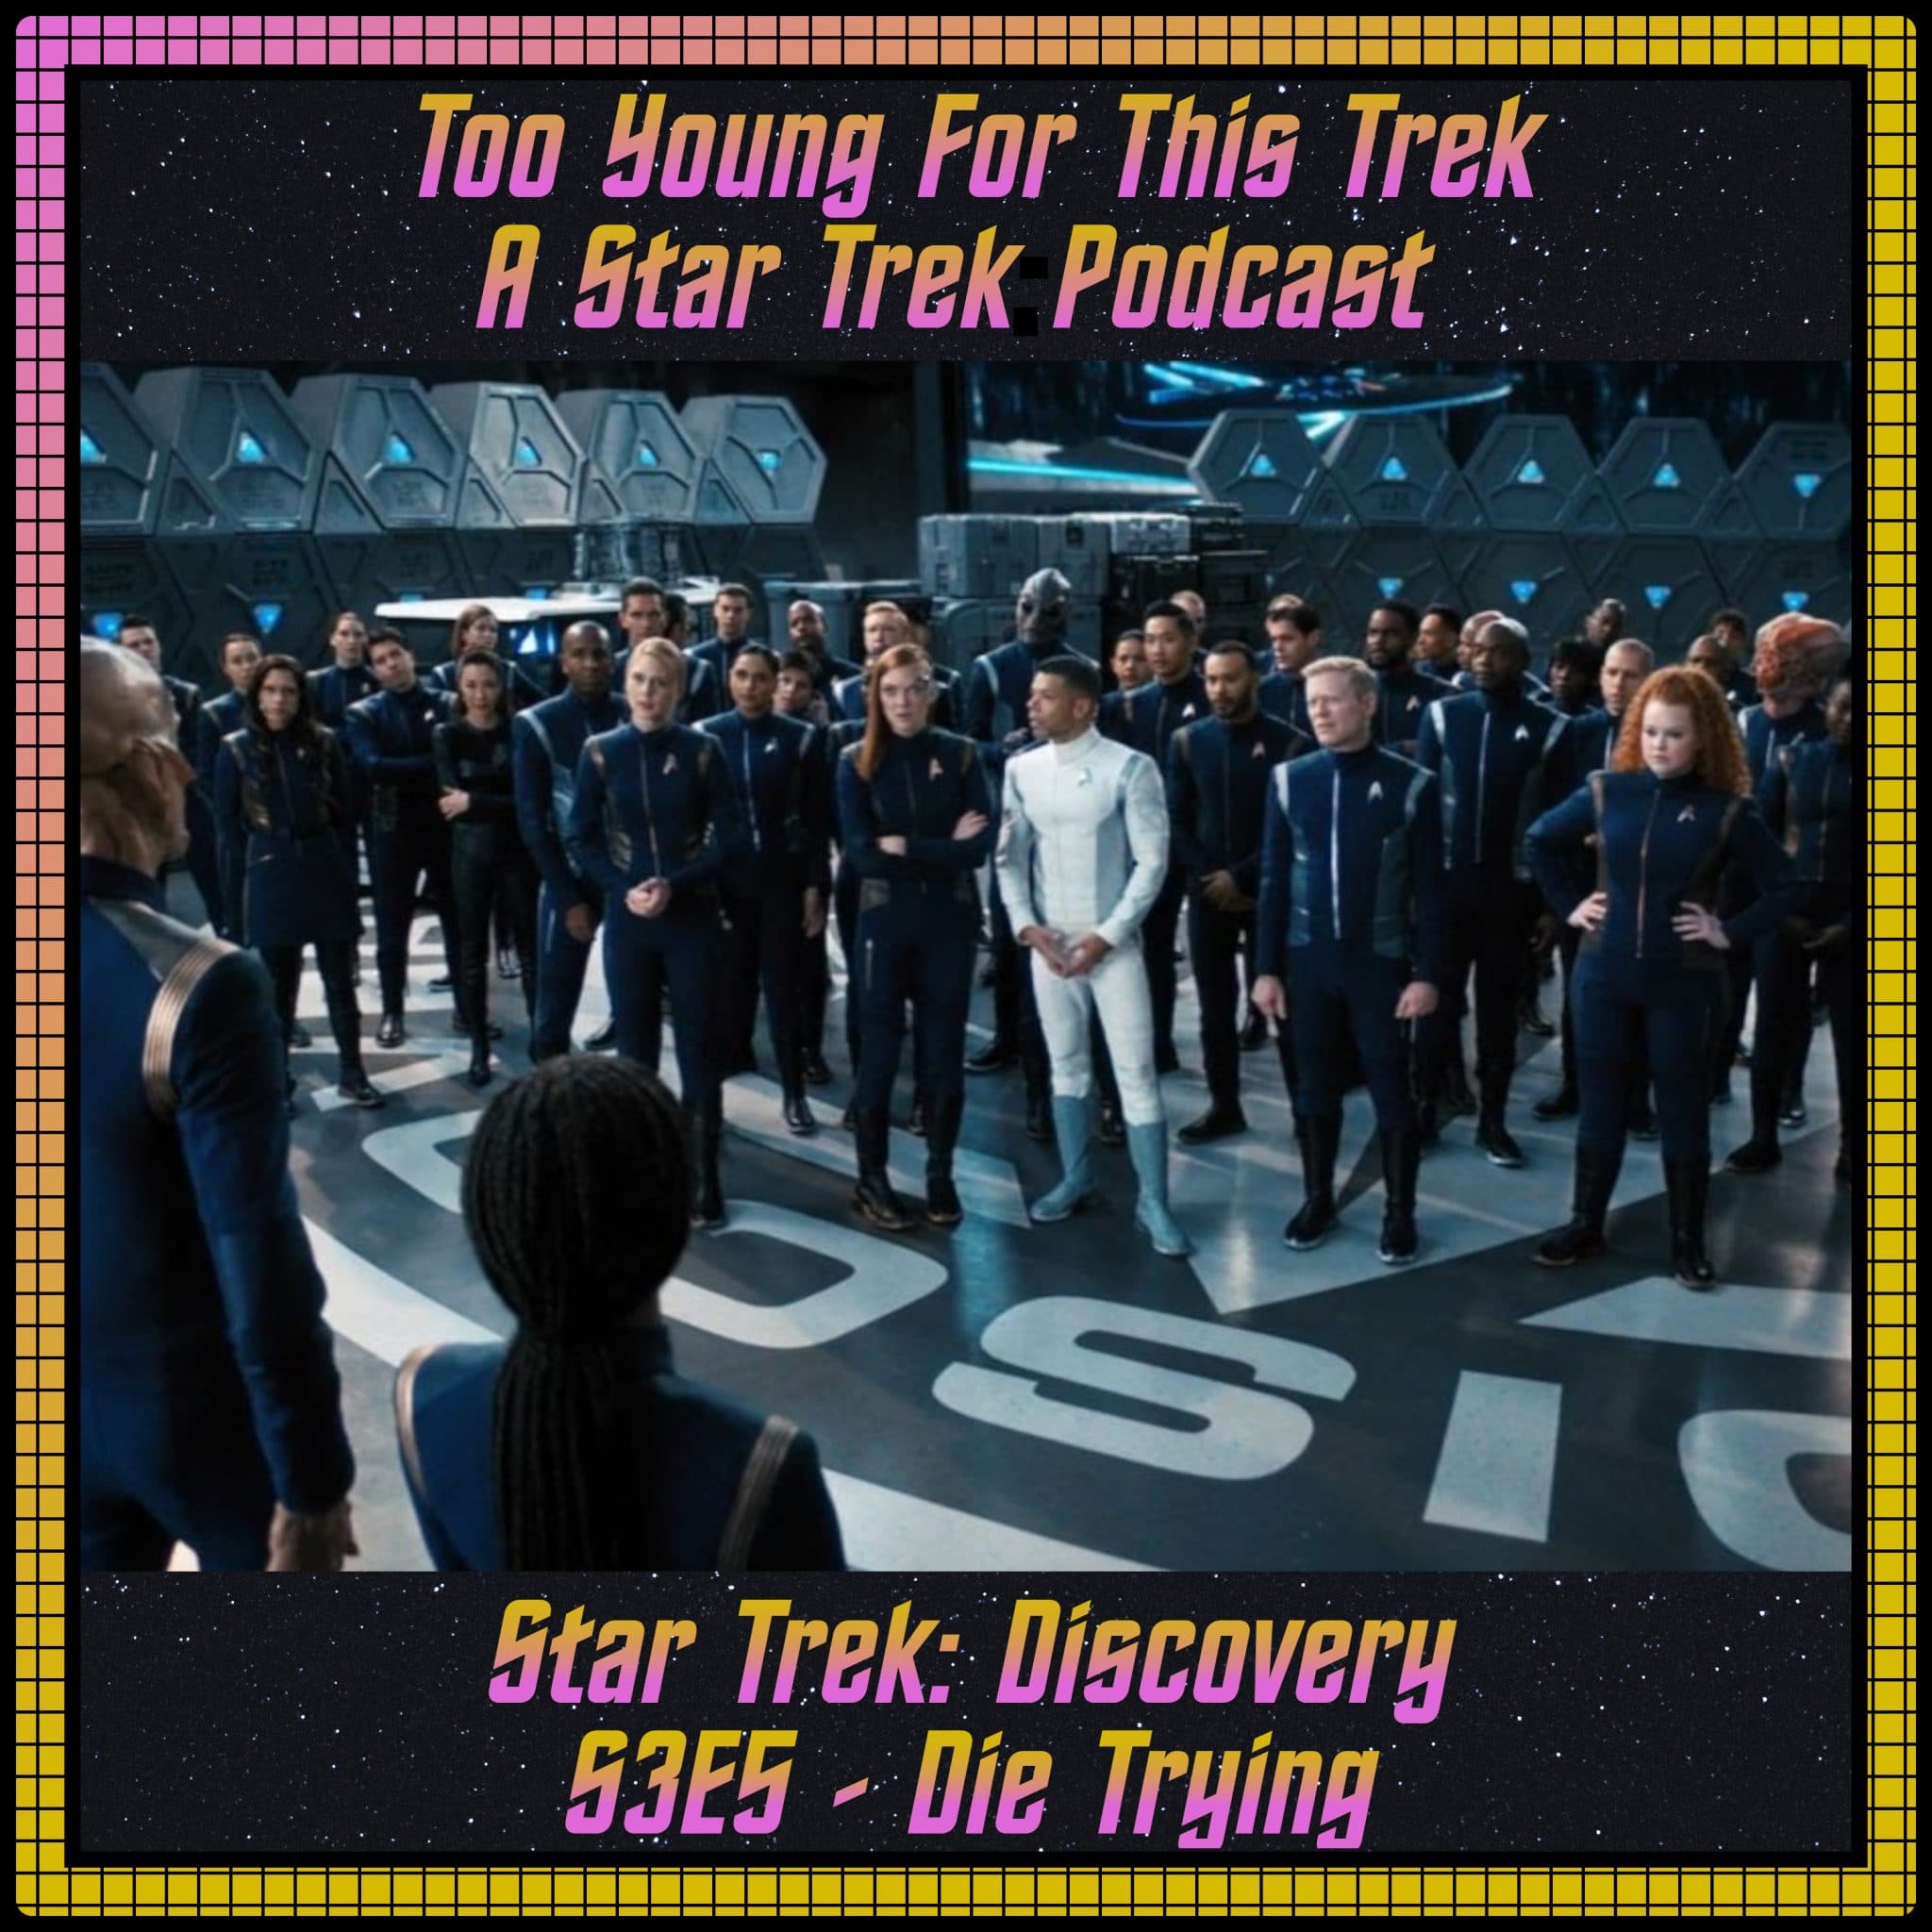 Star Trek: Discovery S3E5 - Die Trying